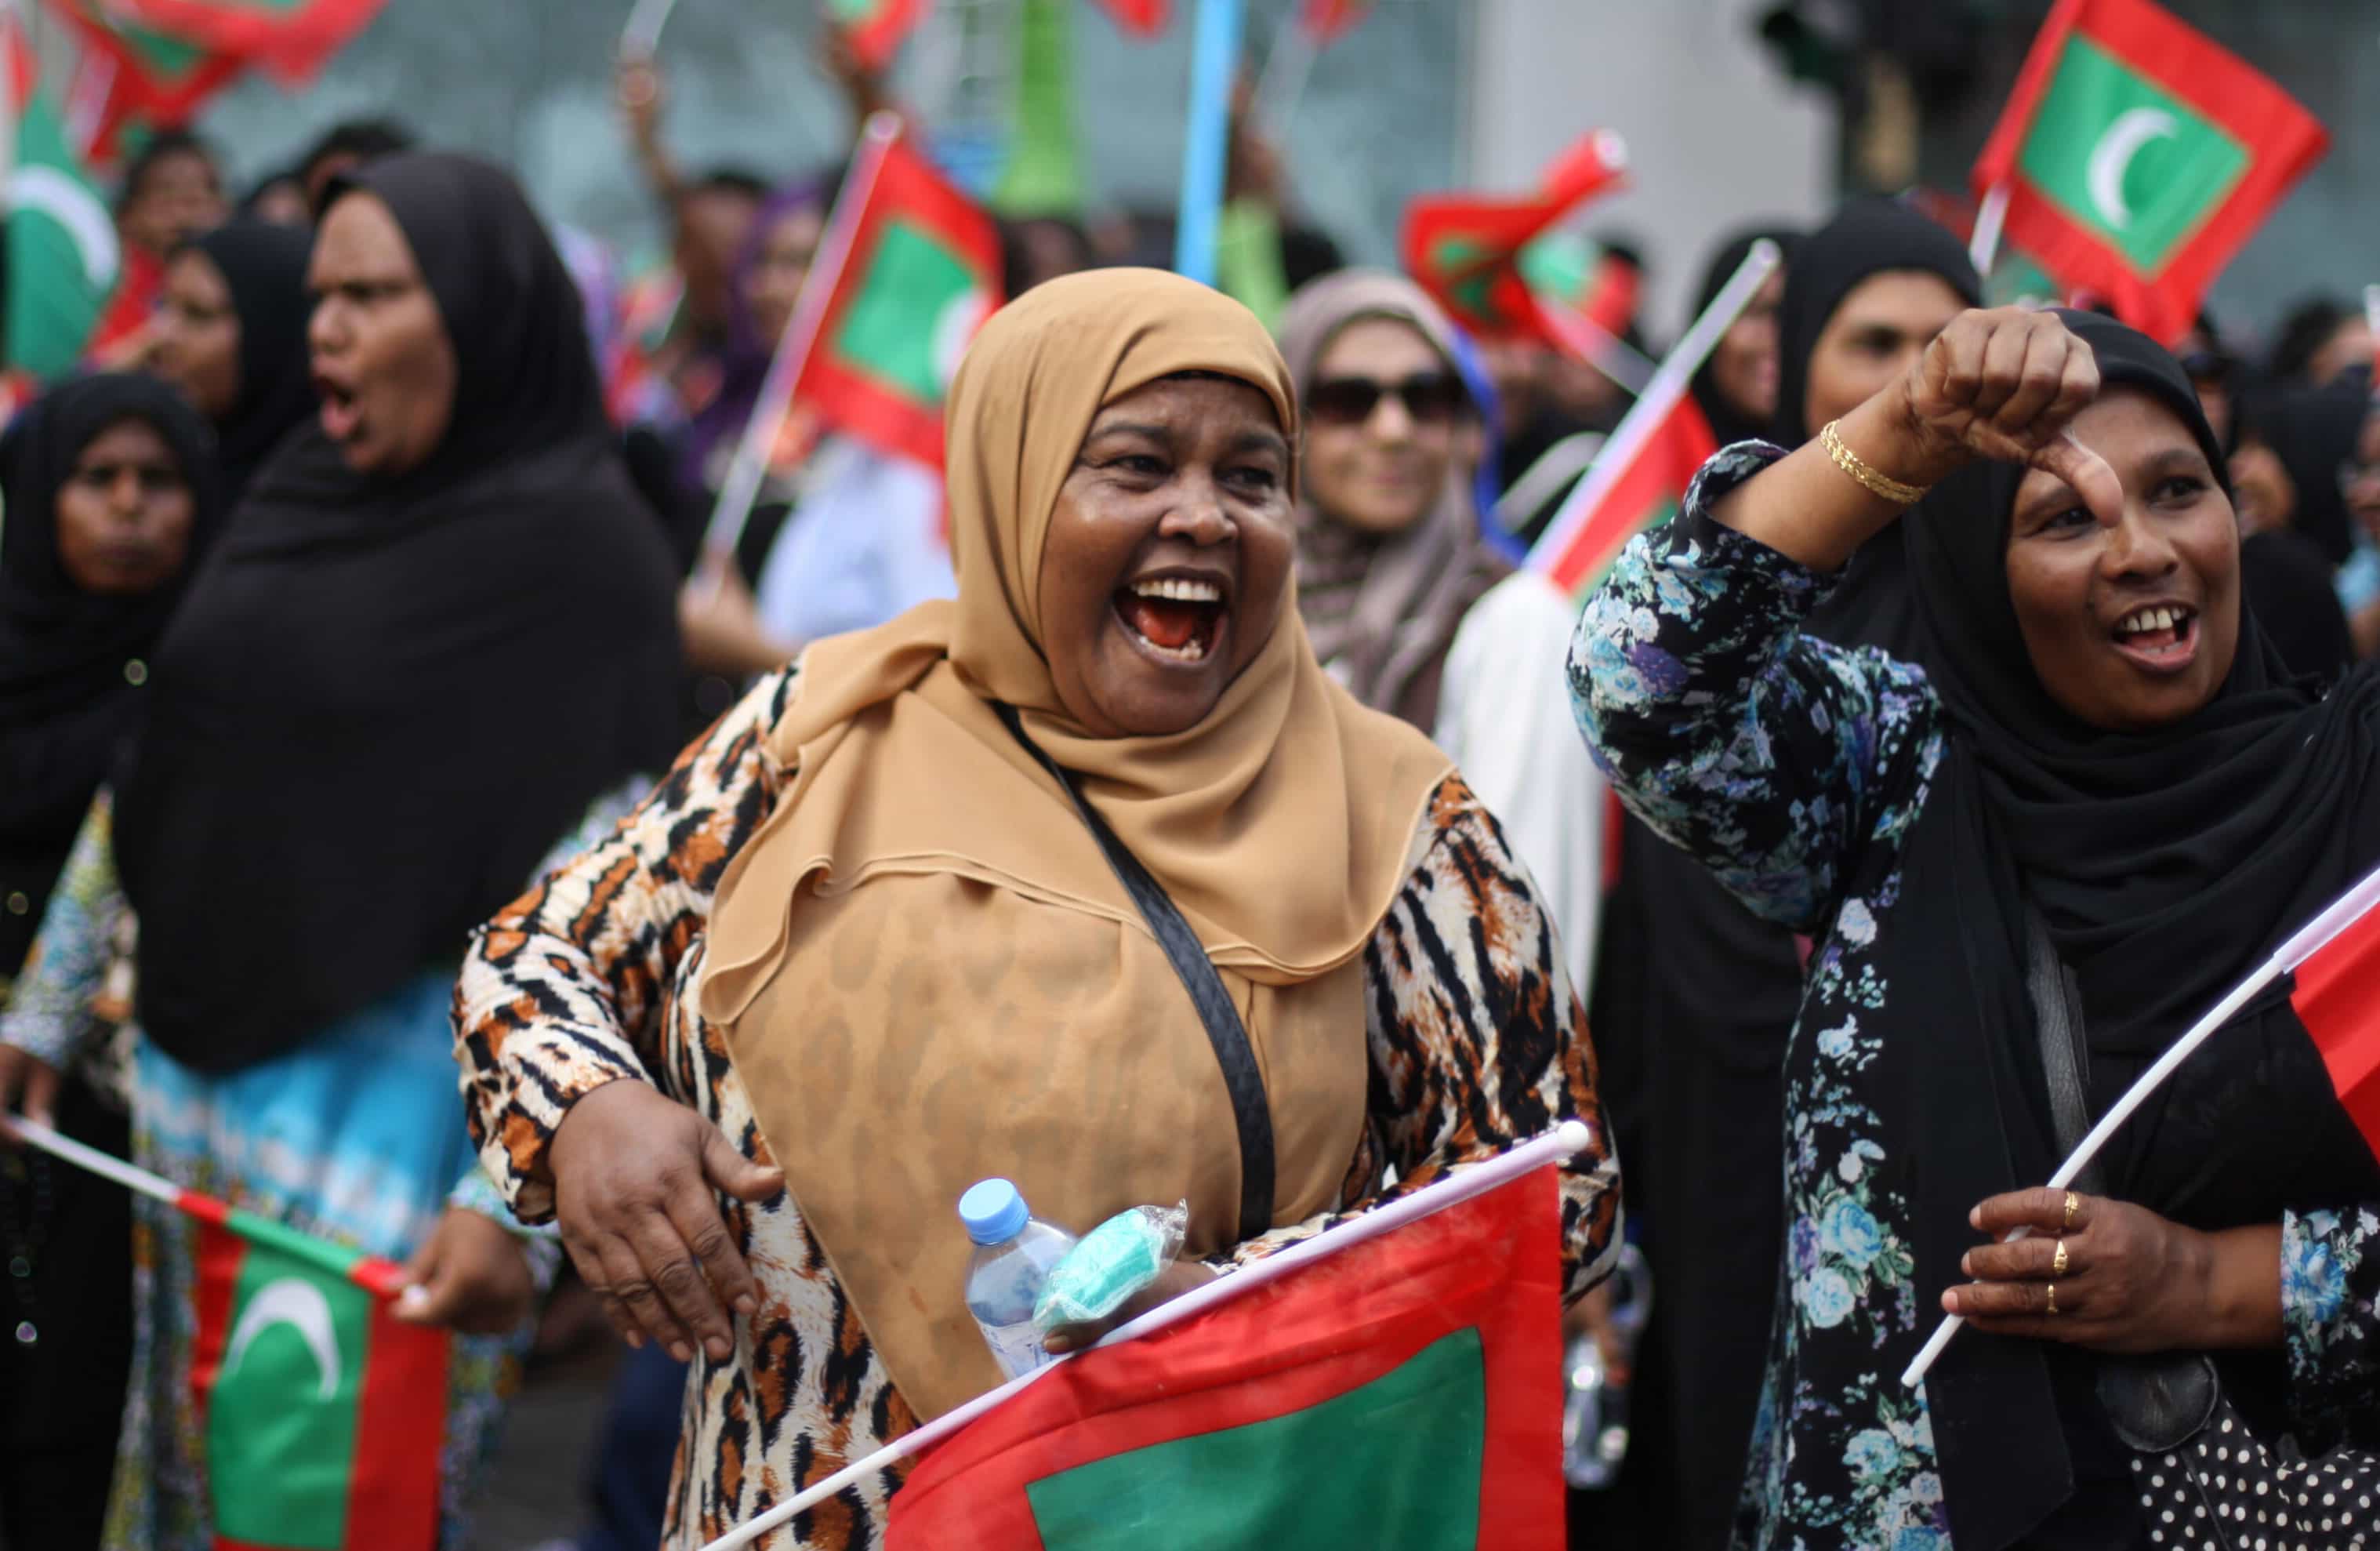 Opposition supporters take part in a protest demanding Maldives President Yameen Abdul Gayoom resign and jailed ex-president Mohamed Nasheed be freed, in Male', 1 May 2015, AP Photo/Sinan Hussain